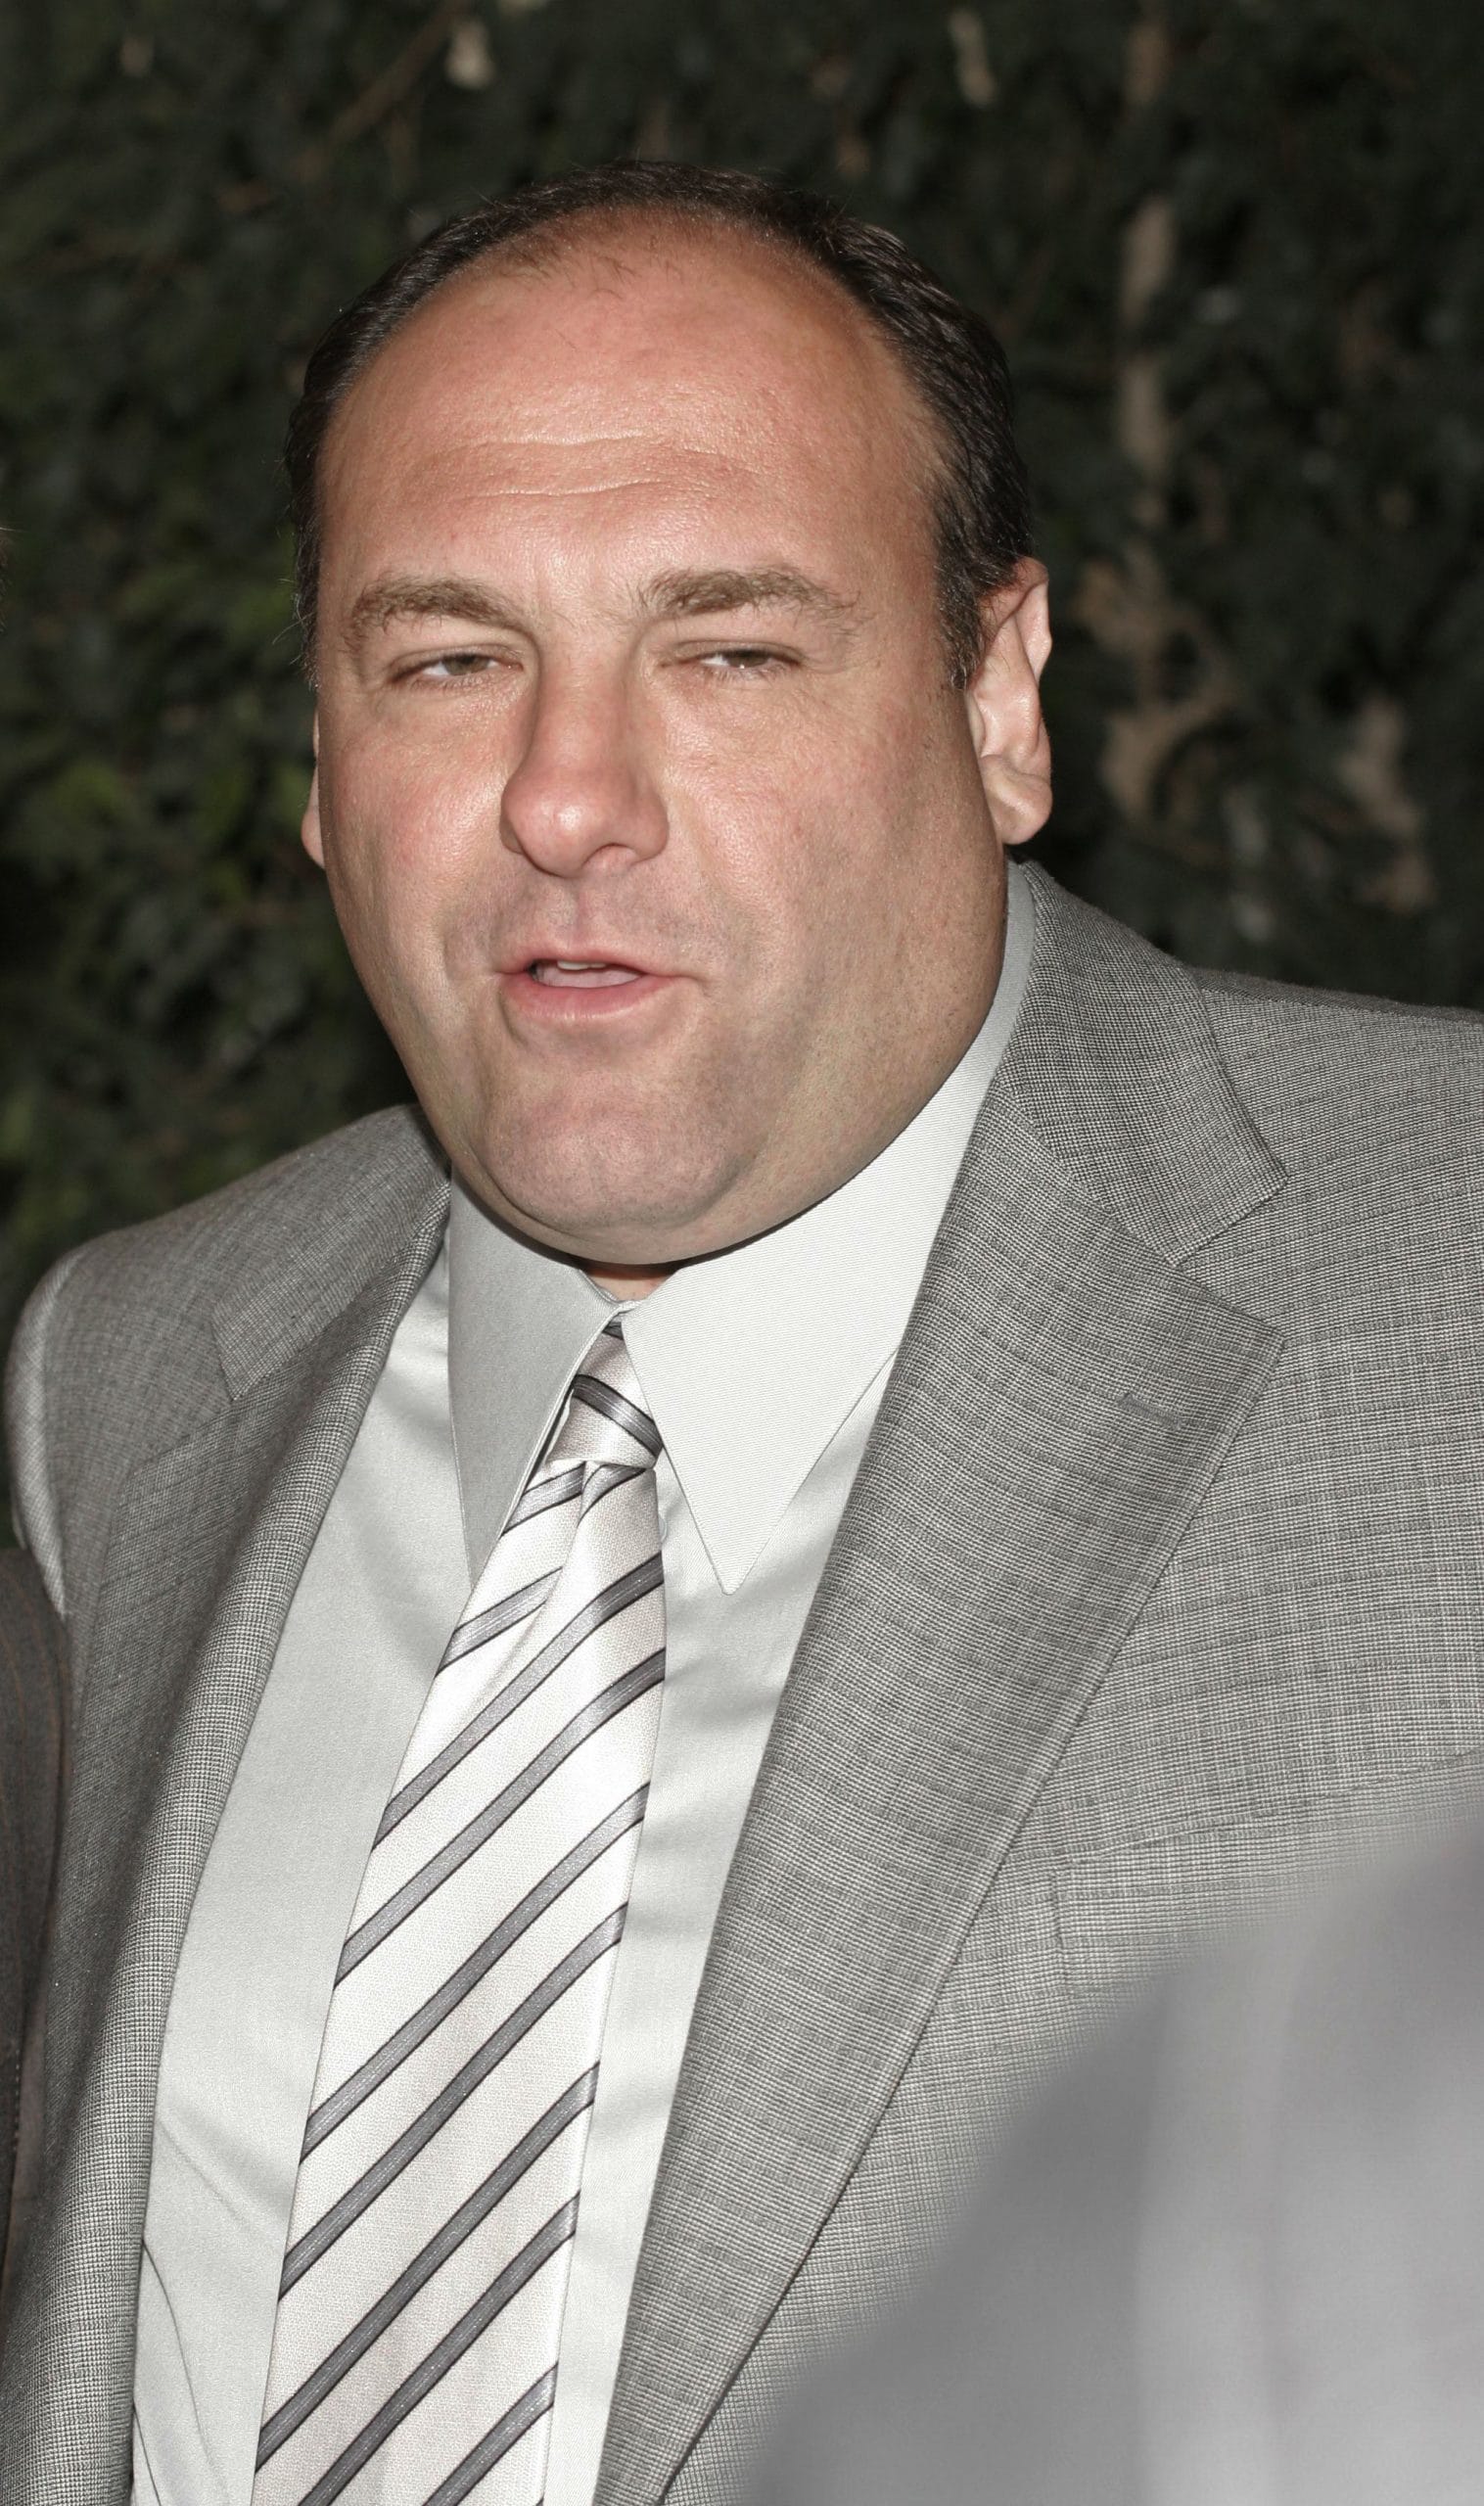 James Gandolfini at arrivals for 14TH ANNUAL ARTISTS FOR THE AFRICAN RAINFOREST, Manhattan Penthouse, New York, NY, May 16, 2005